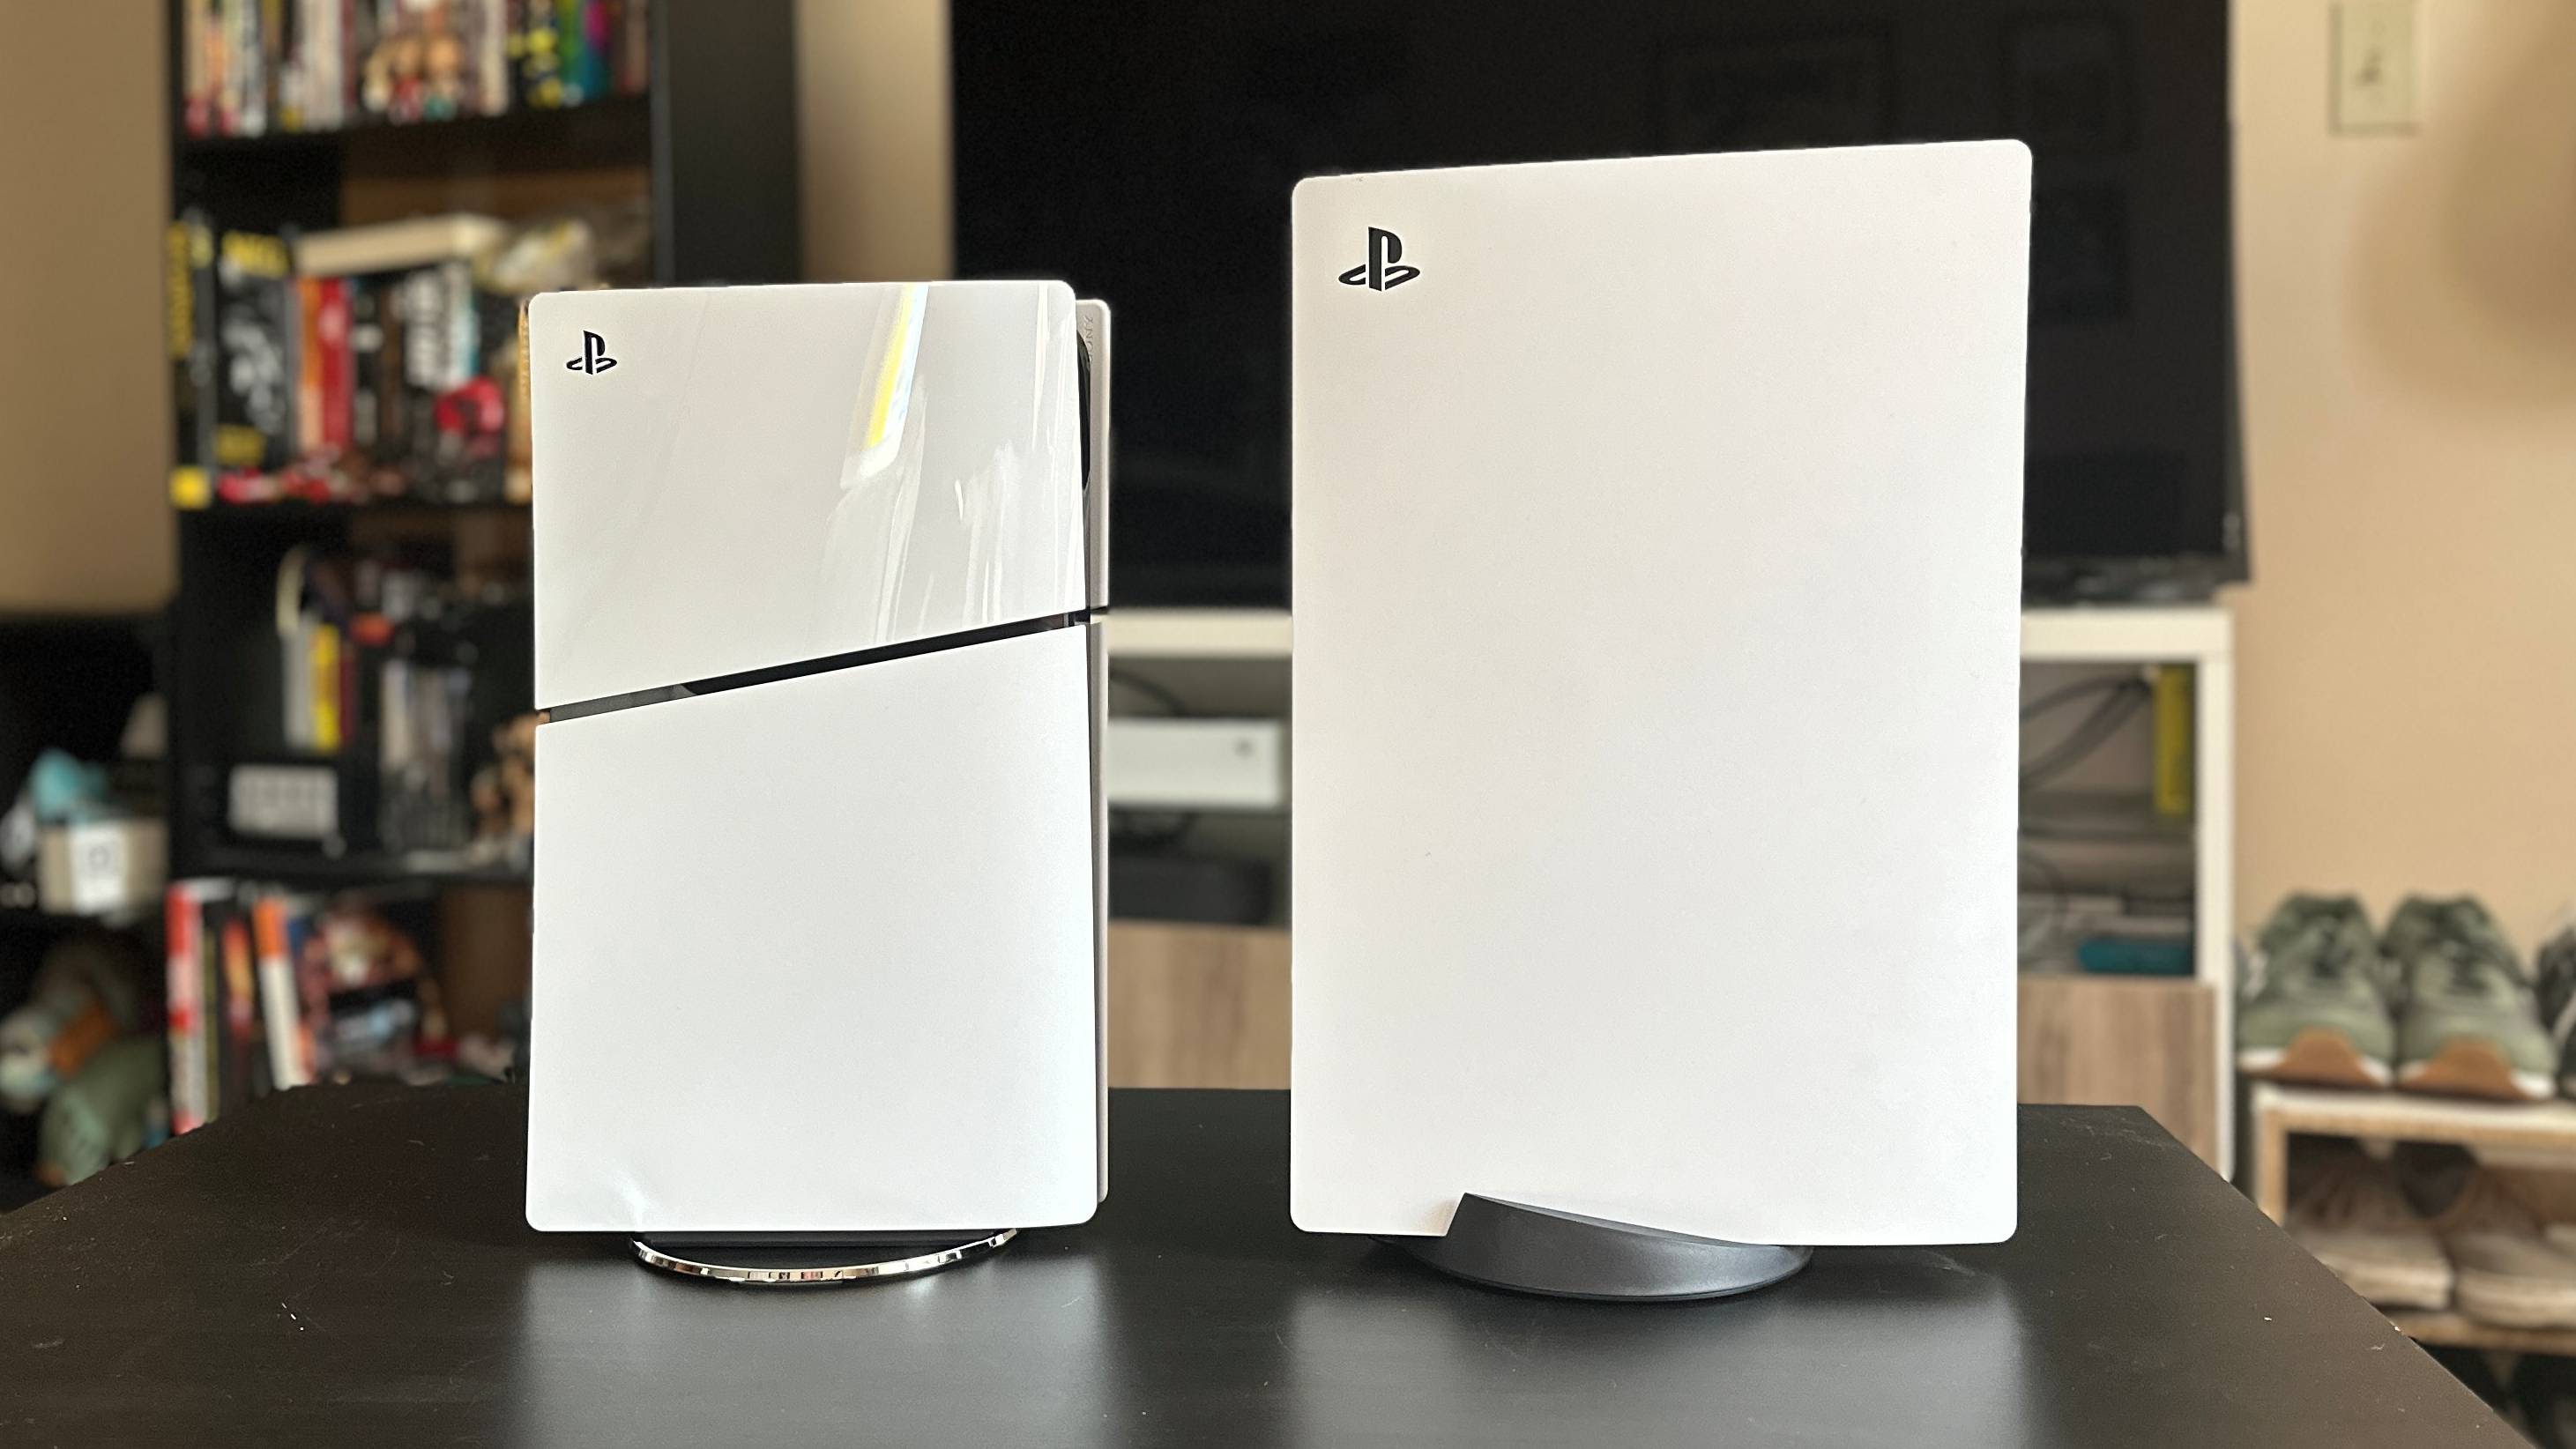 PS5 Slim, PS5 or PS5 Digital Edition: Which PS5 model to choose?